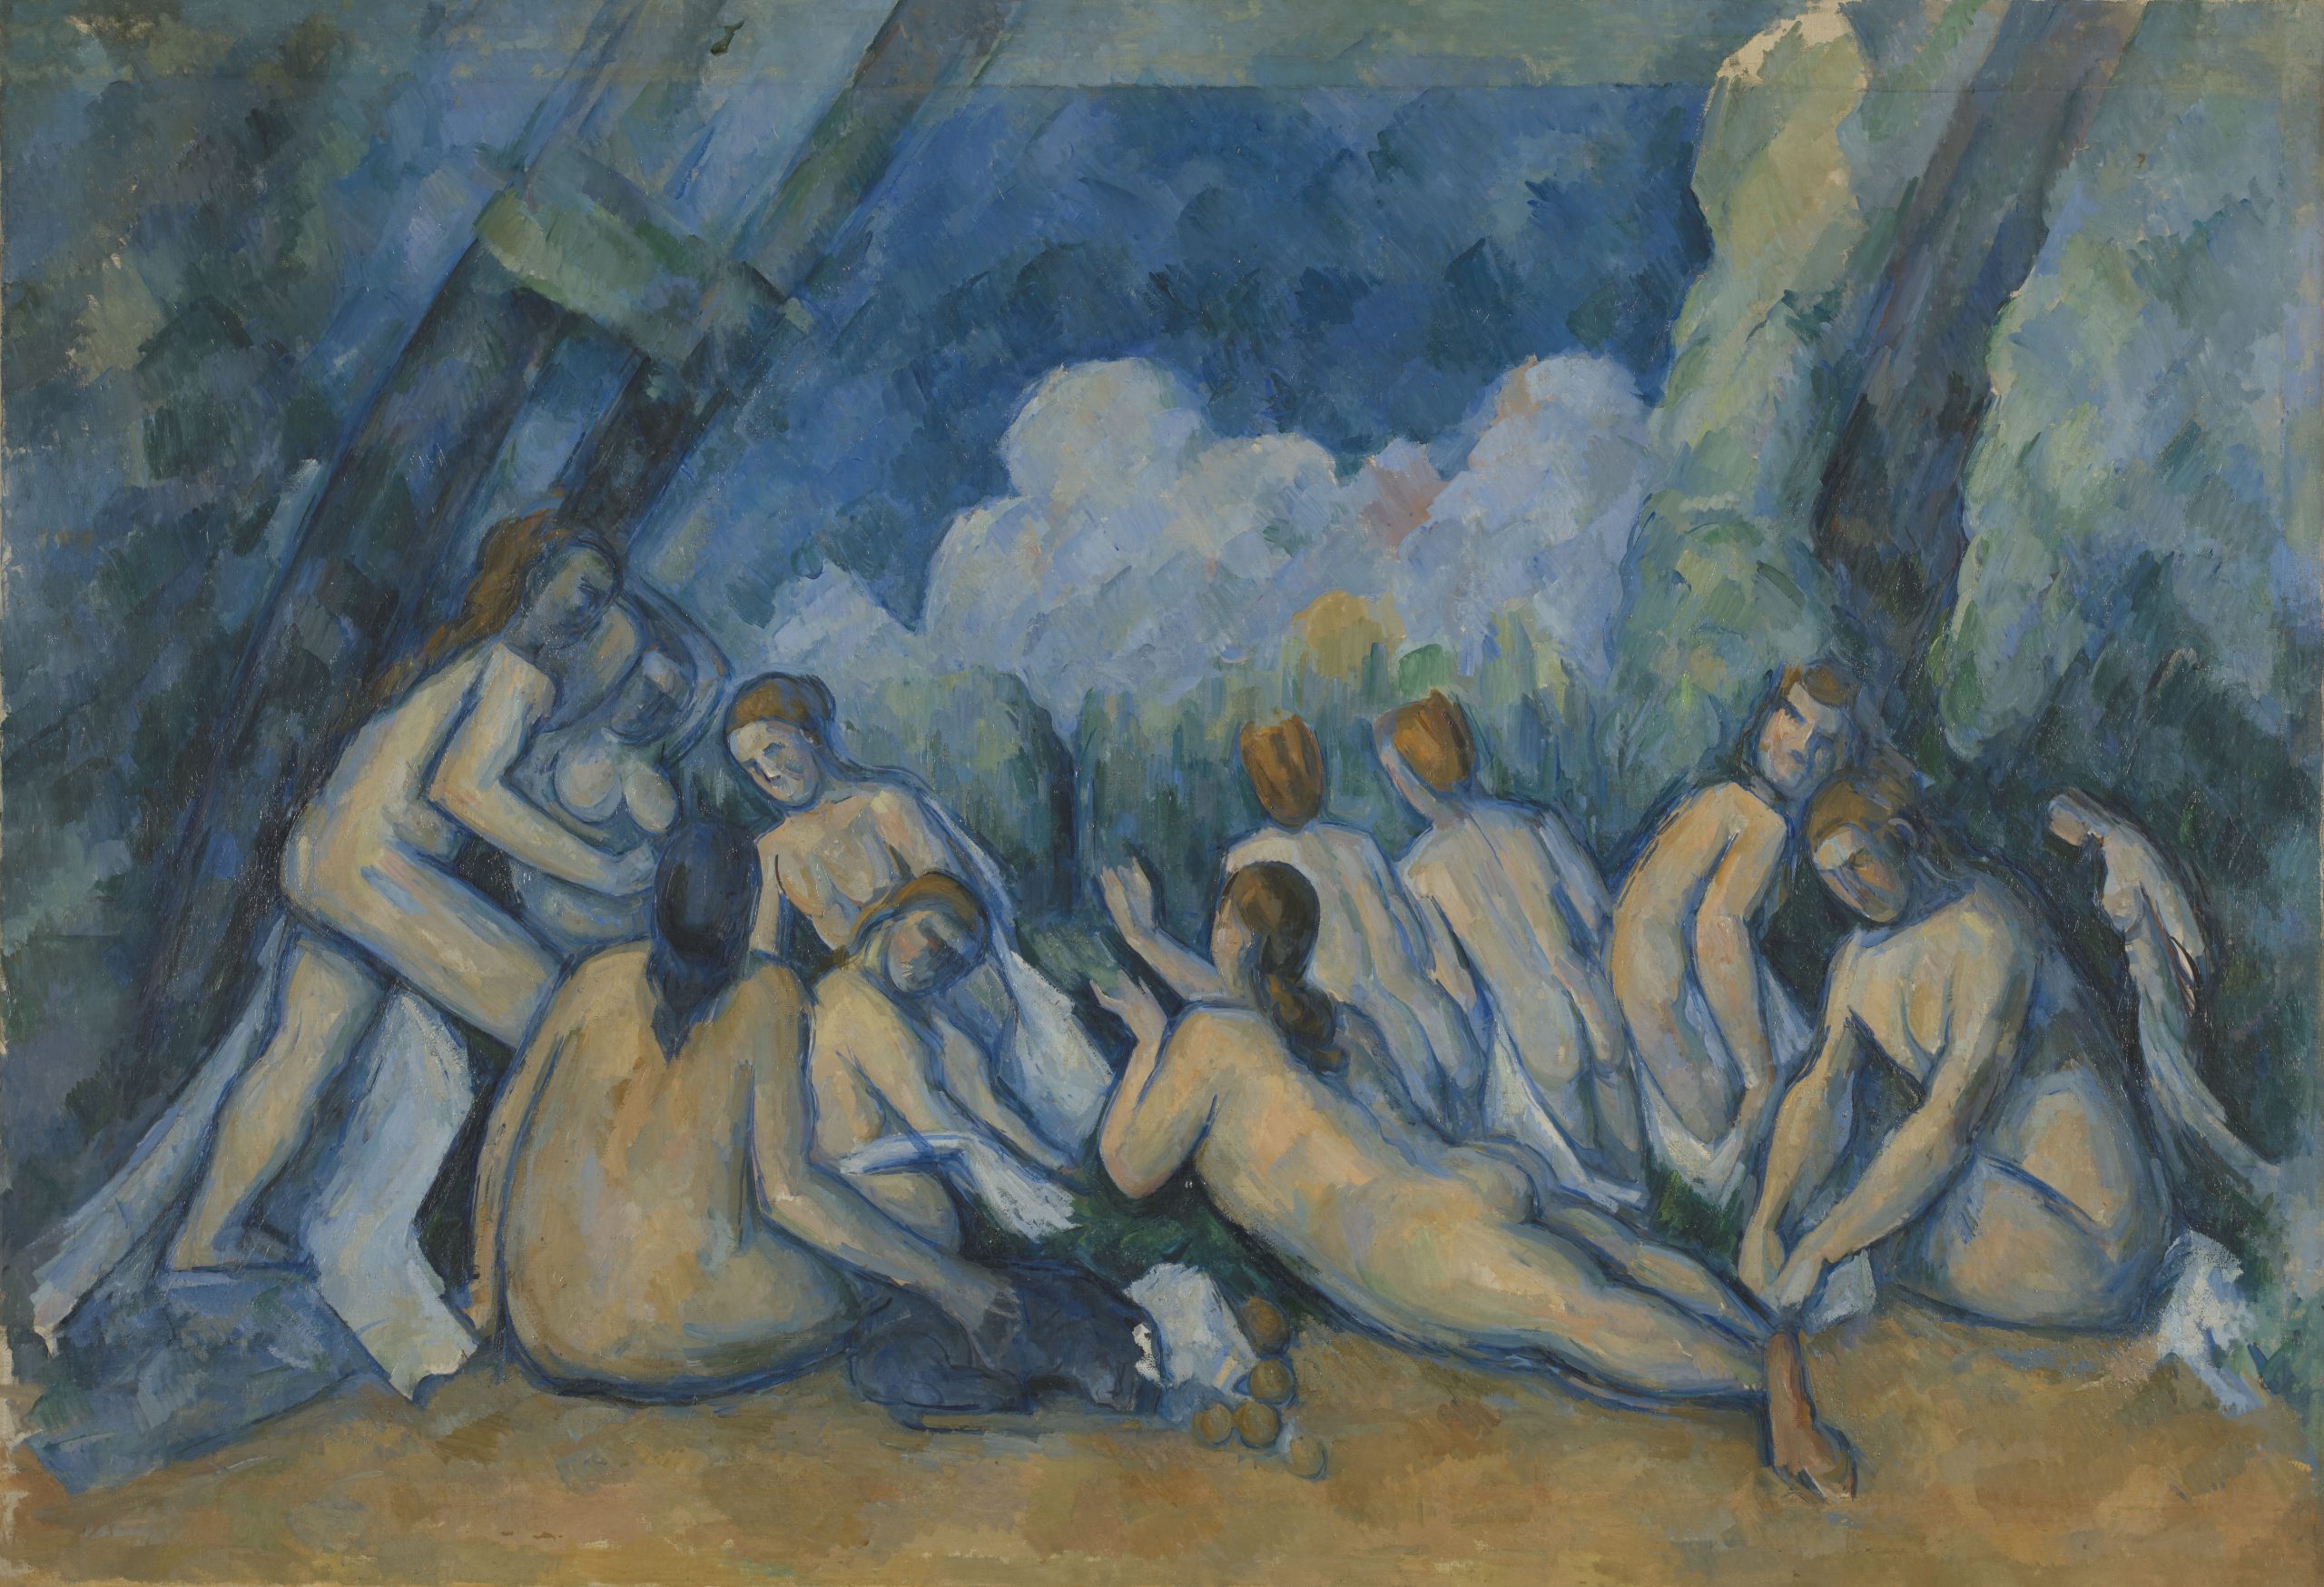 Paul Cezanne - Bathers c.1894-1905. Presented by the National Gallery, purchased with a special grant and the aid of the Max Rayne Foundation, 1964